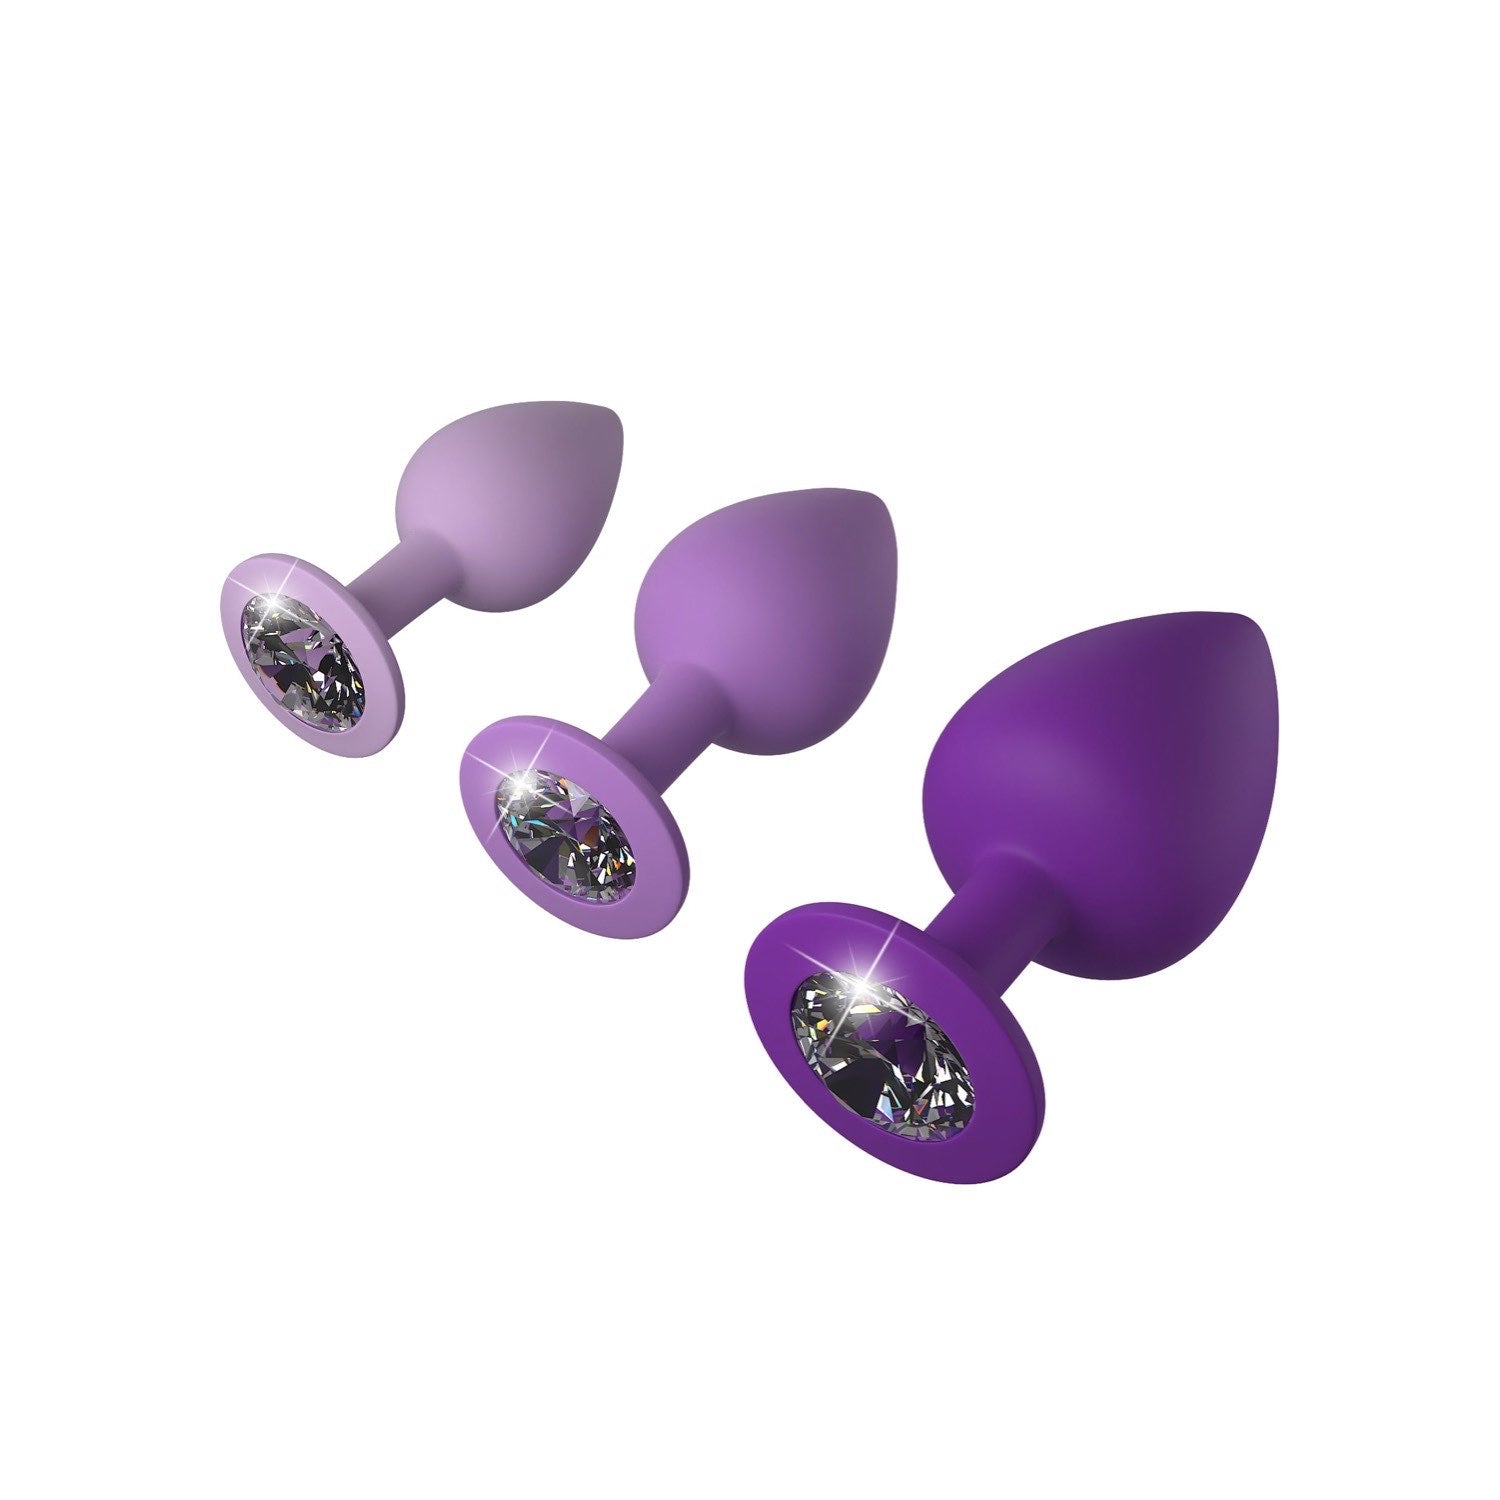 Fantasy For Her Little Gems Trainer Set - Purple Butt Plugs with Jewel Bases - Set of 3 Sizes by Pipedream